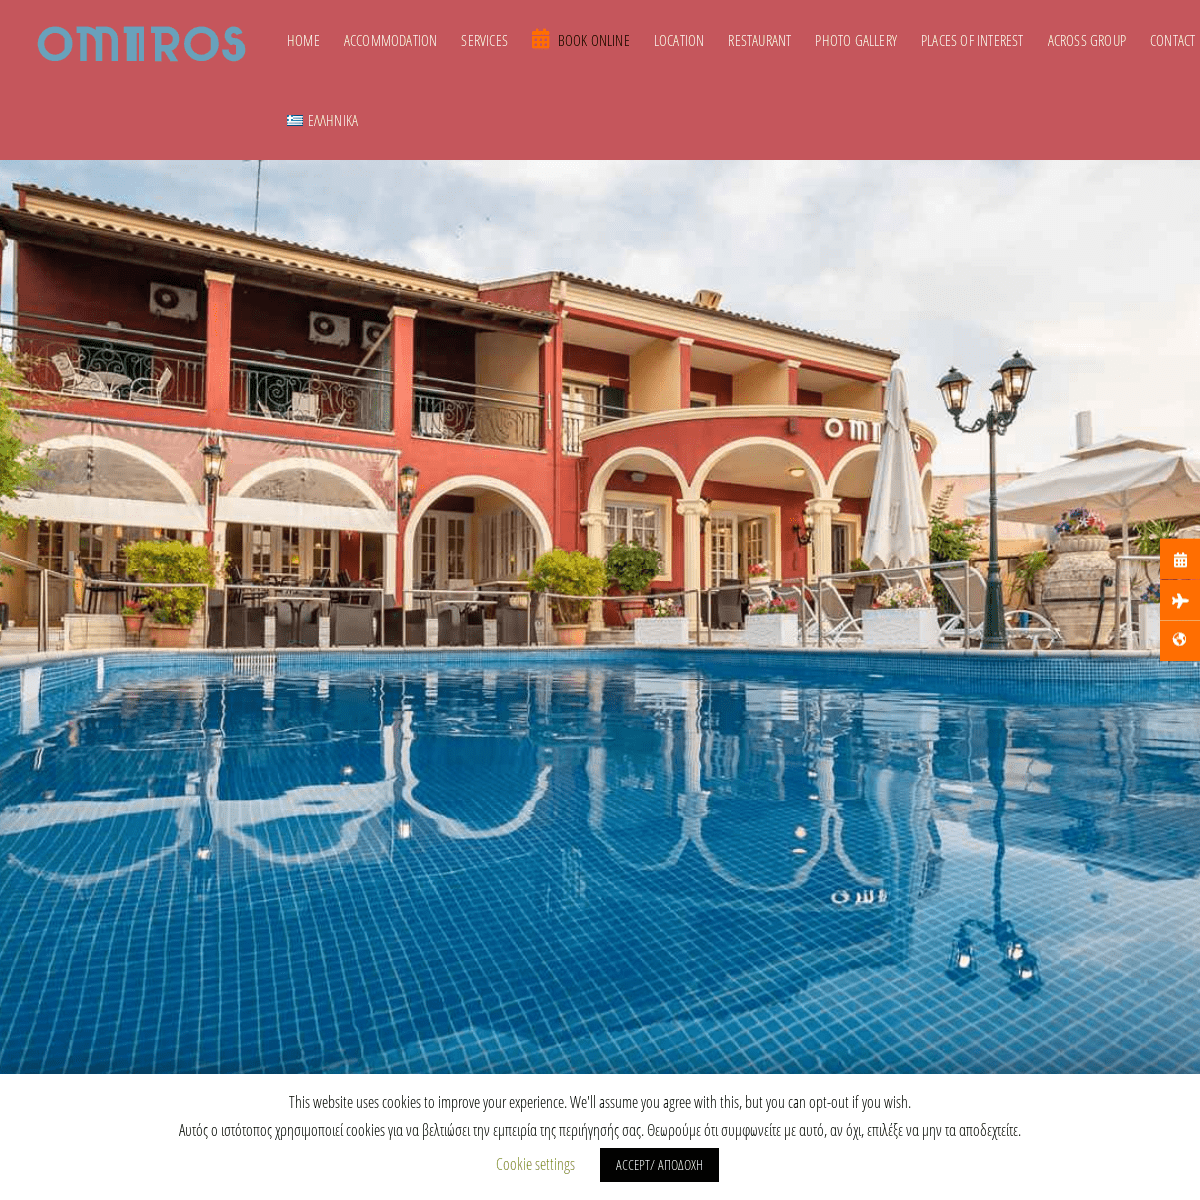 A complete backup of hotelomiros.com